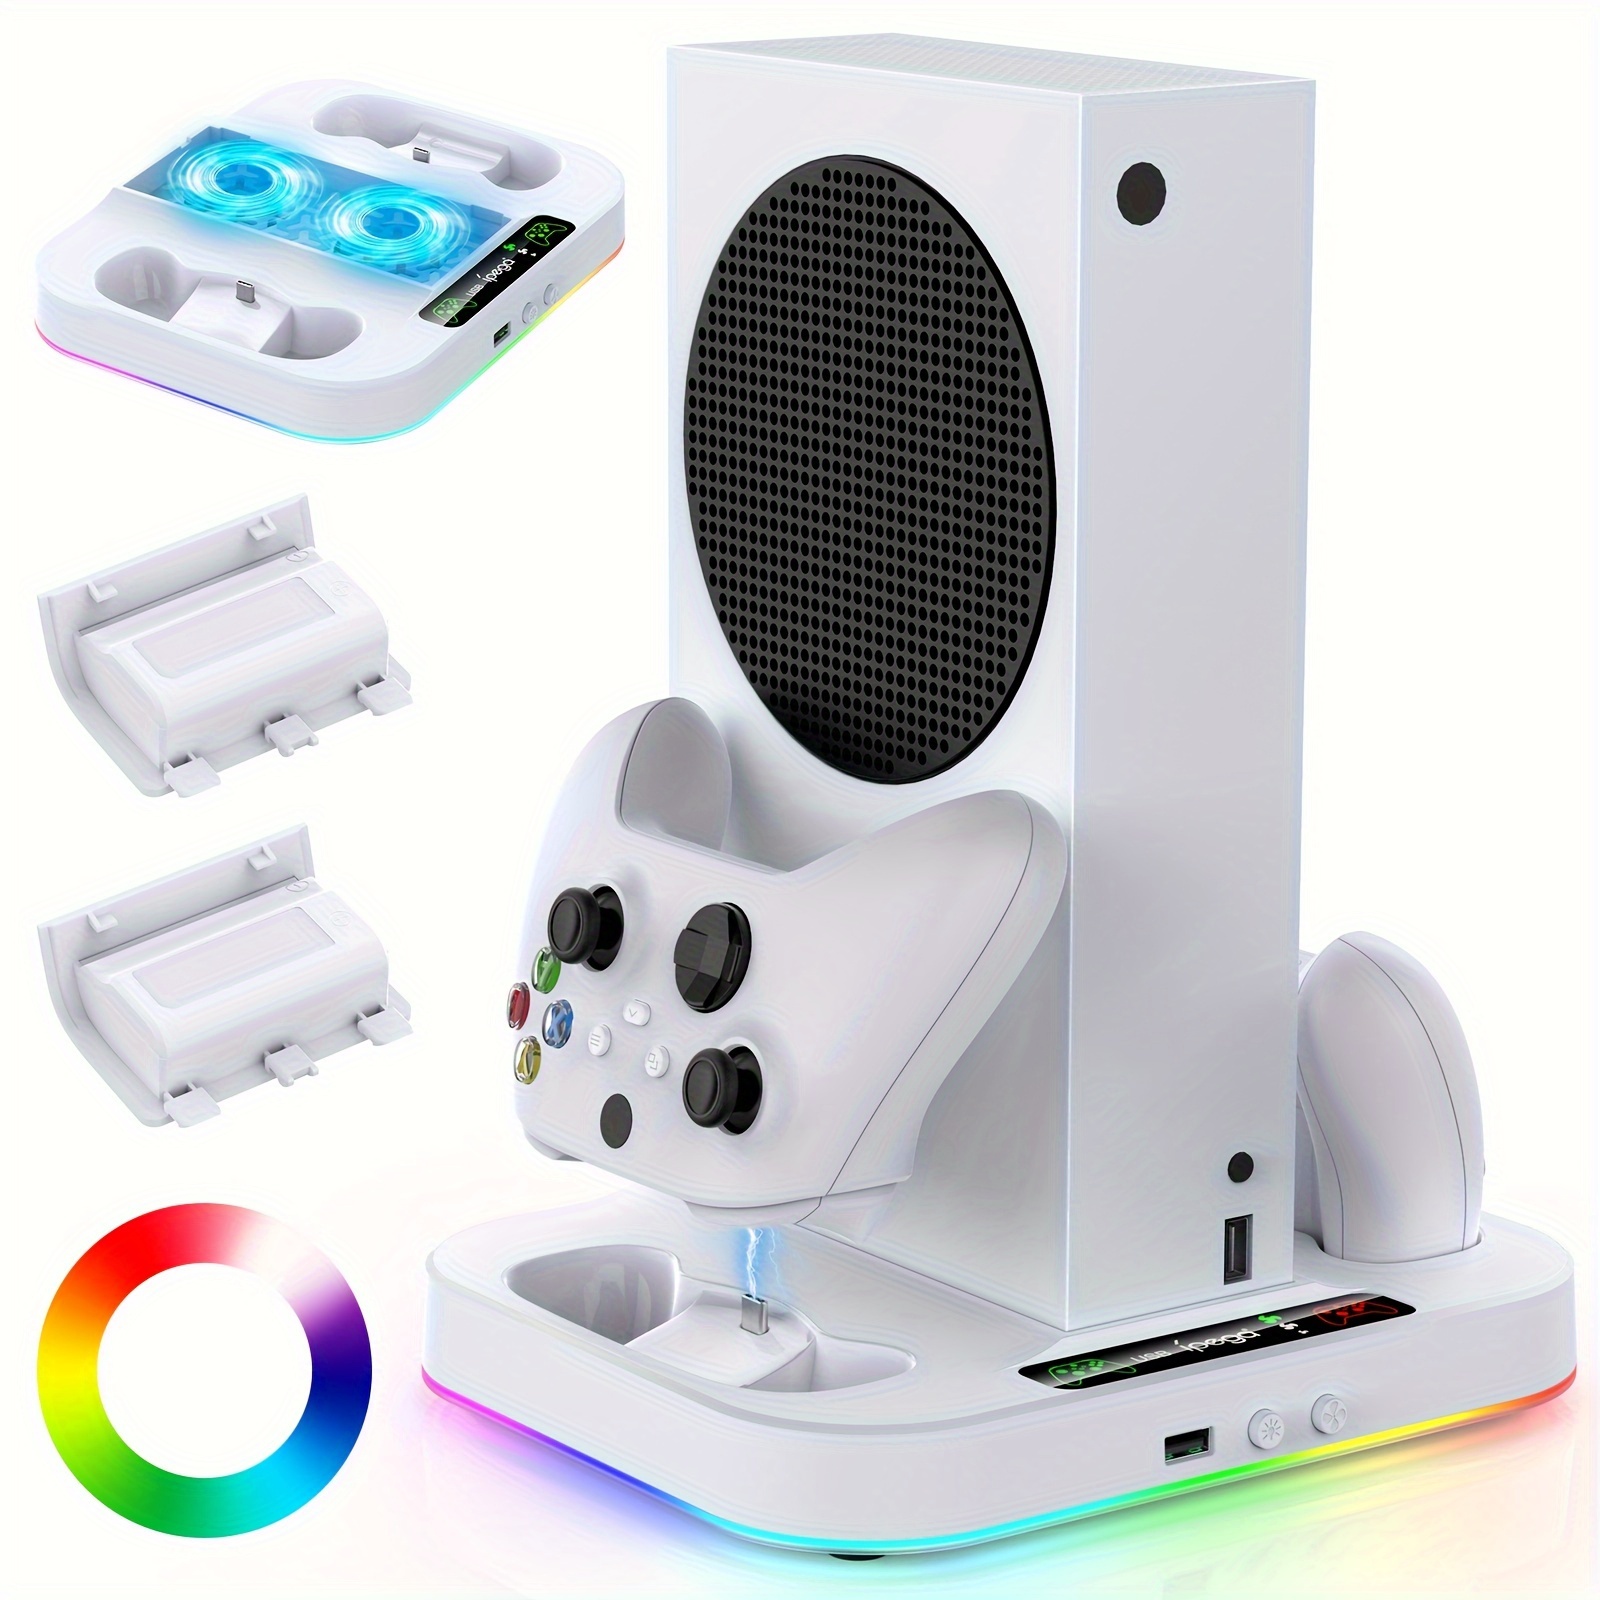 

Cooling Stand For Series S With Rgb Light, Fast Charger Station With 2x1400mah Batteries, Cooler Accessories With 3-speed Adjustable Fan, Dual Charger Dock, 15 Light Modes, 2.0 Usb Port